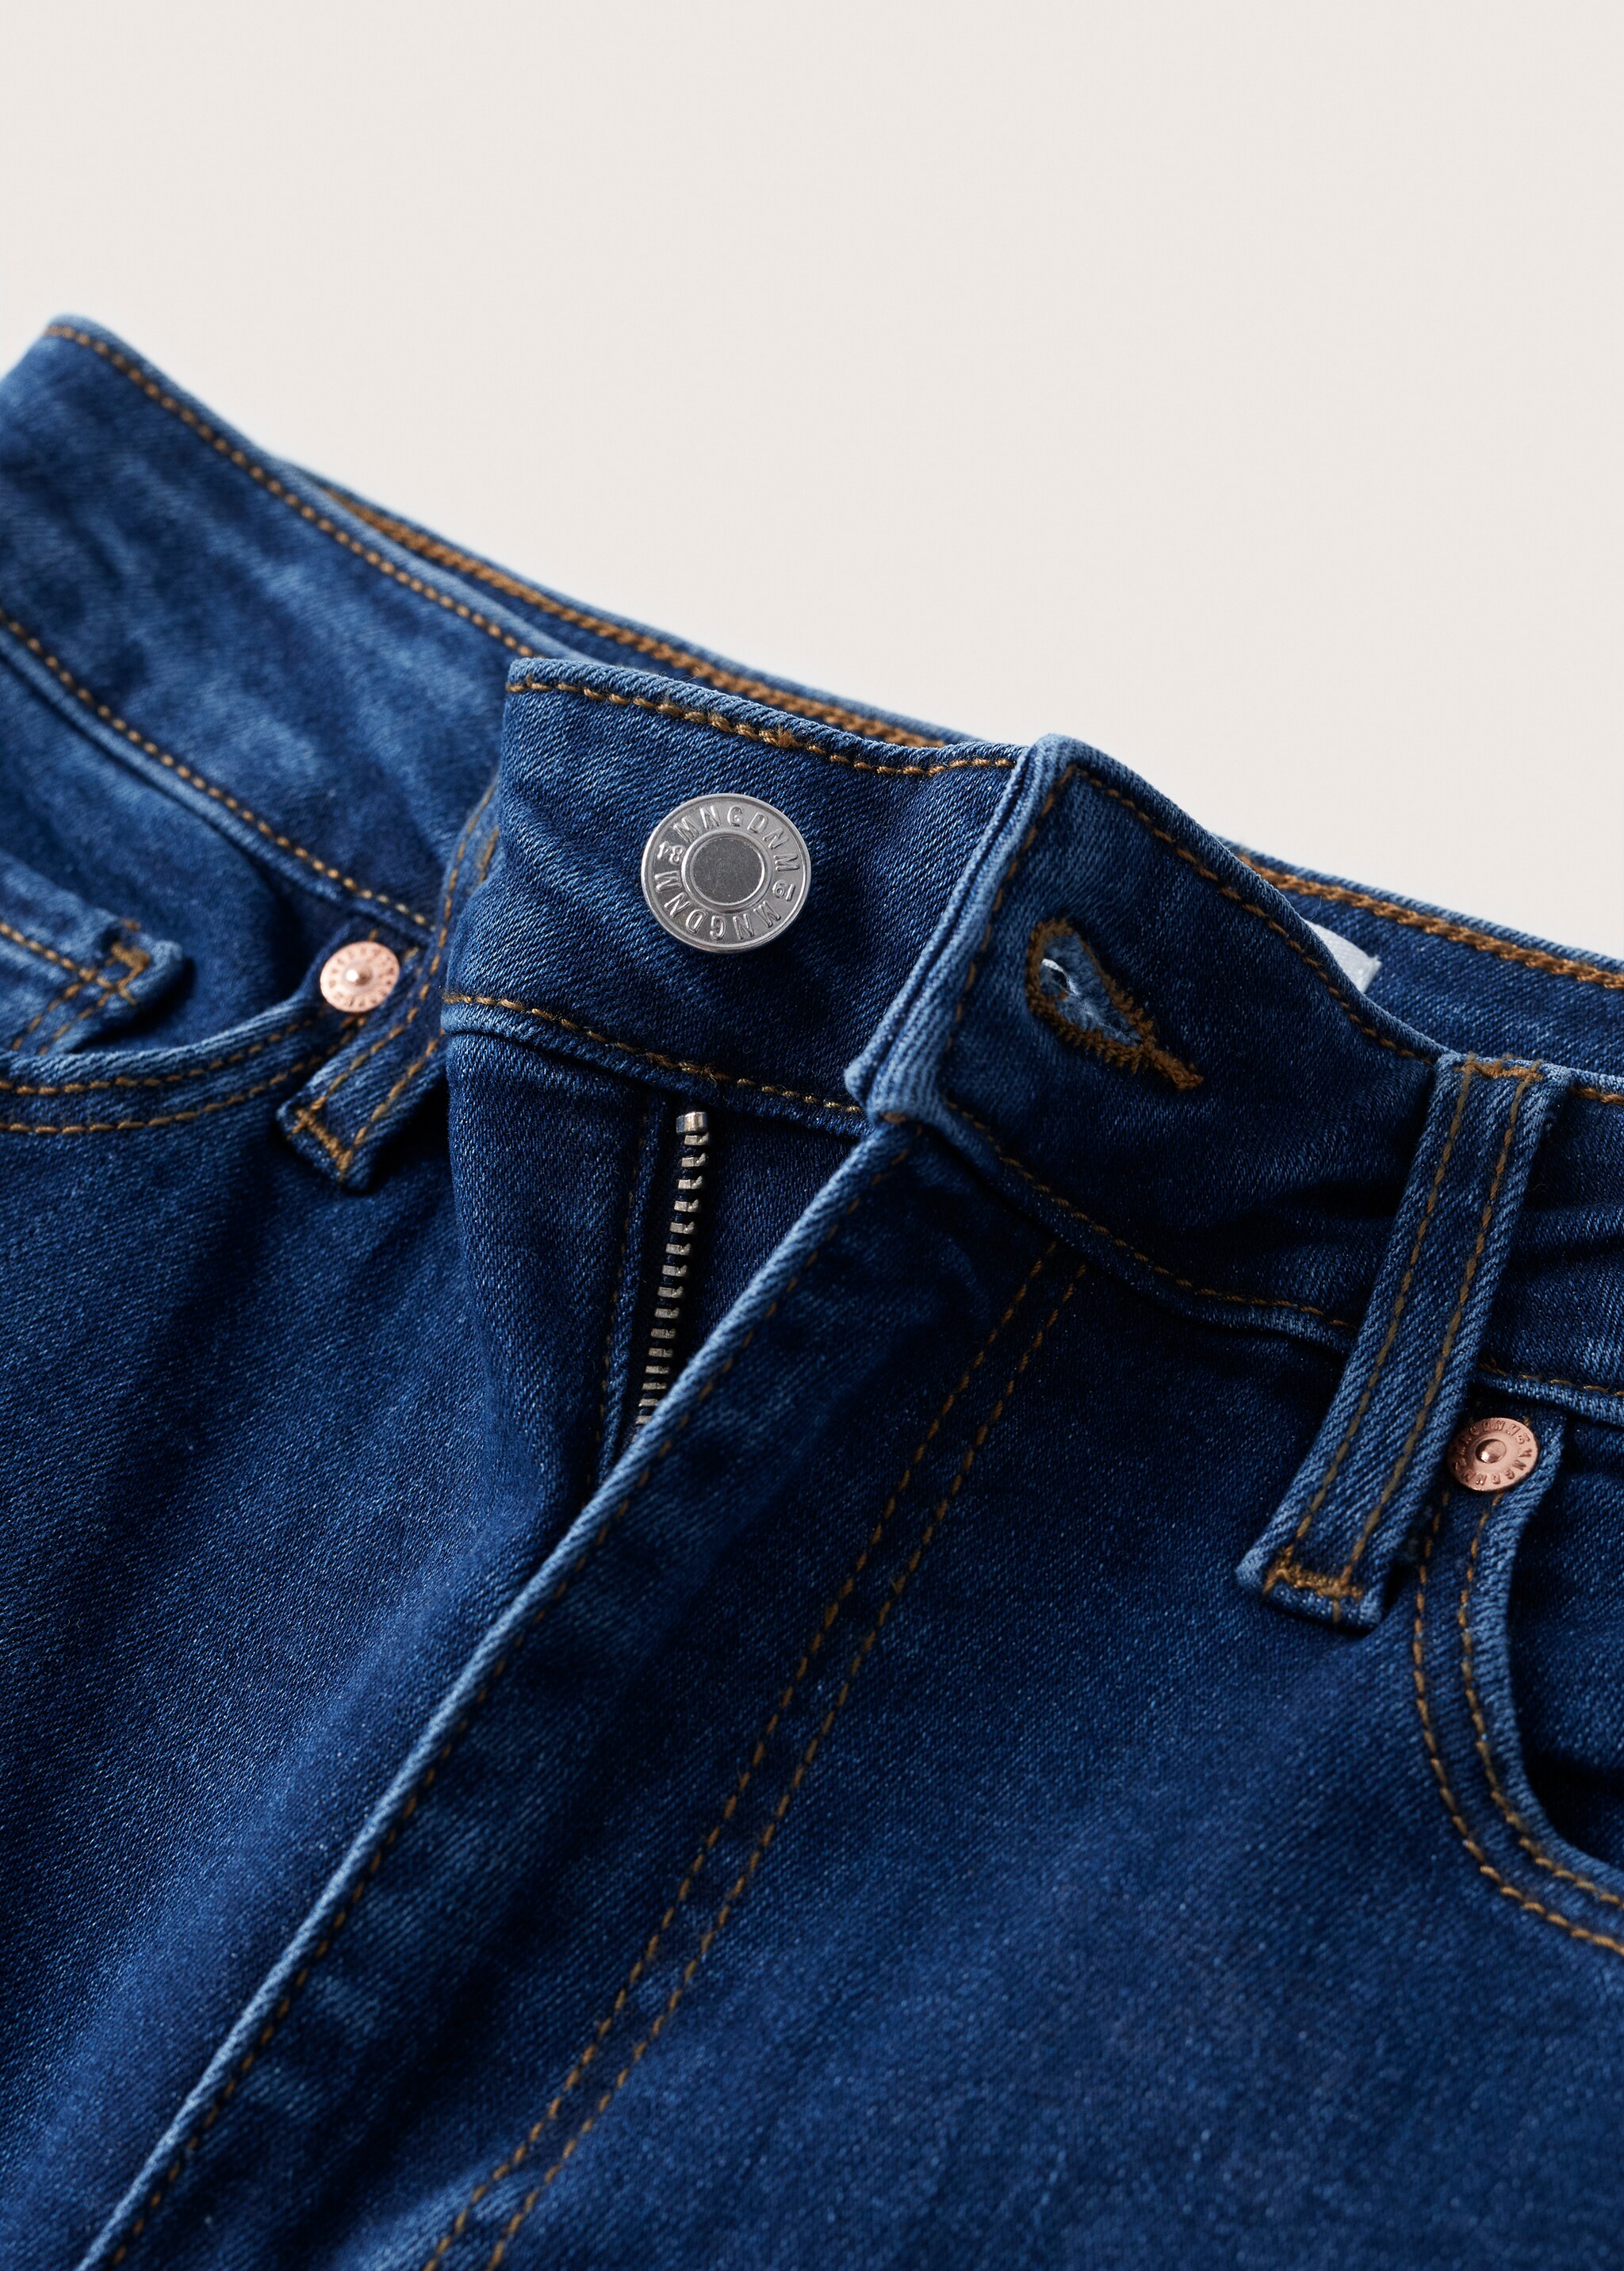 High-rise skinny jeans - Details of the article 8